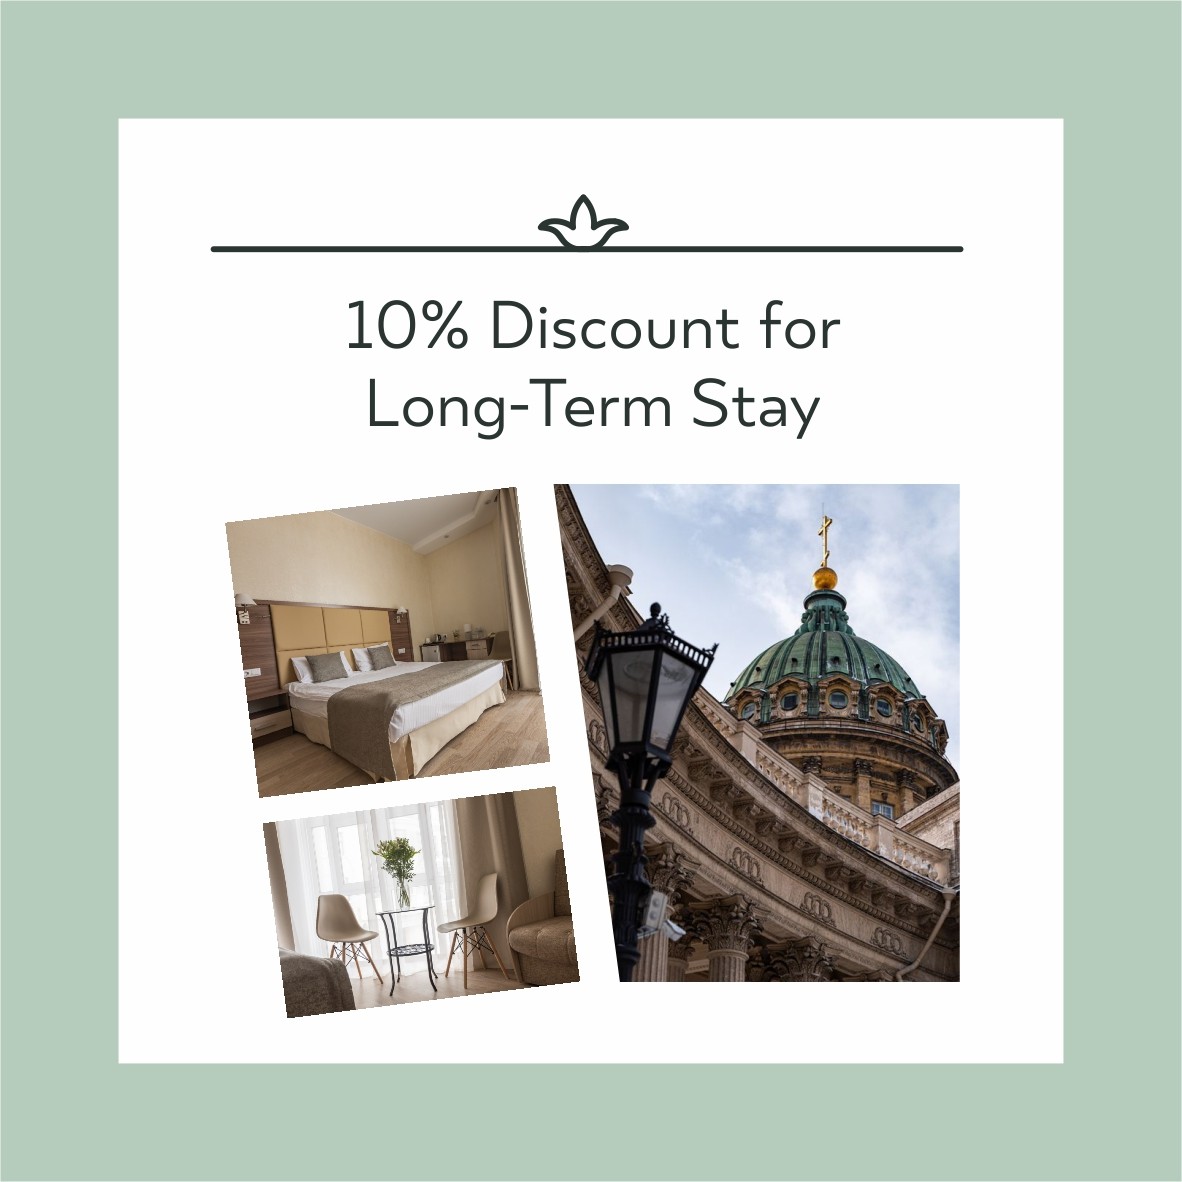 10% Discount for Long-Term Stay